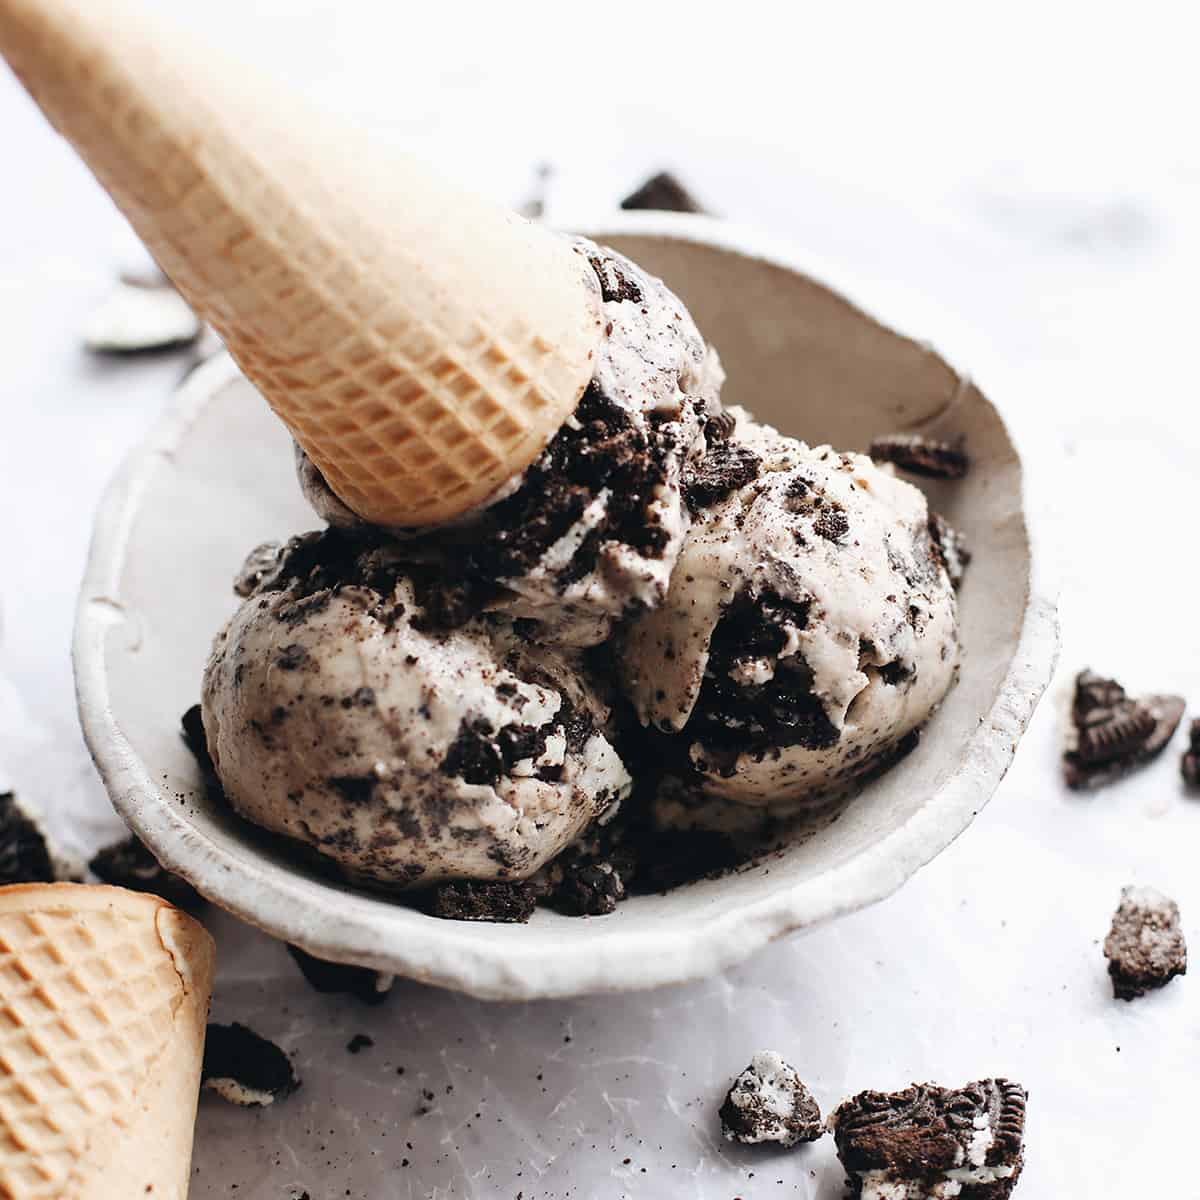 Oreo ice cream in a bowl with an ice cream cone